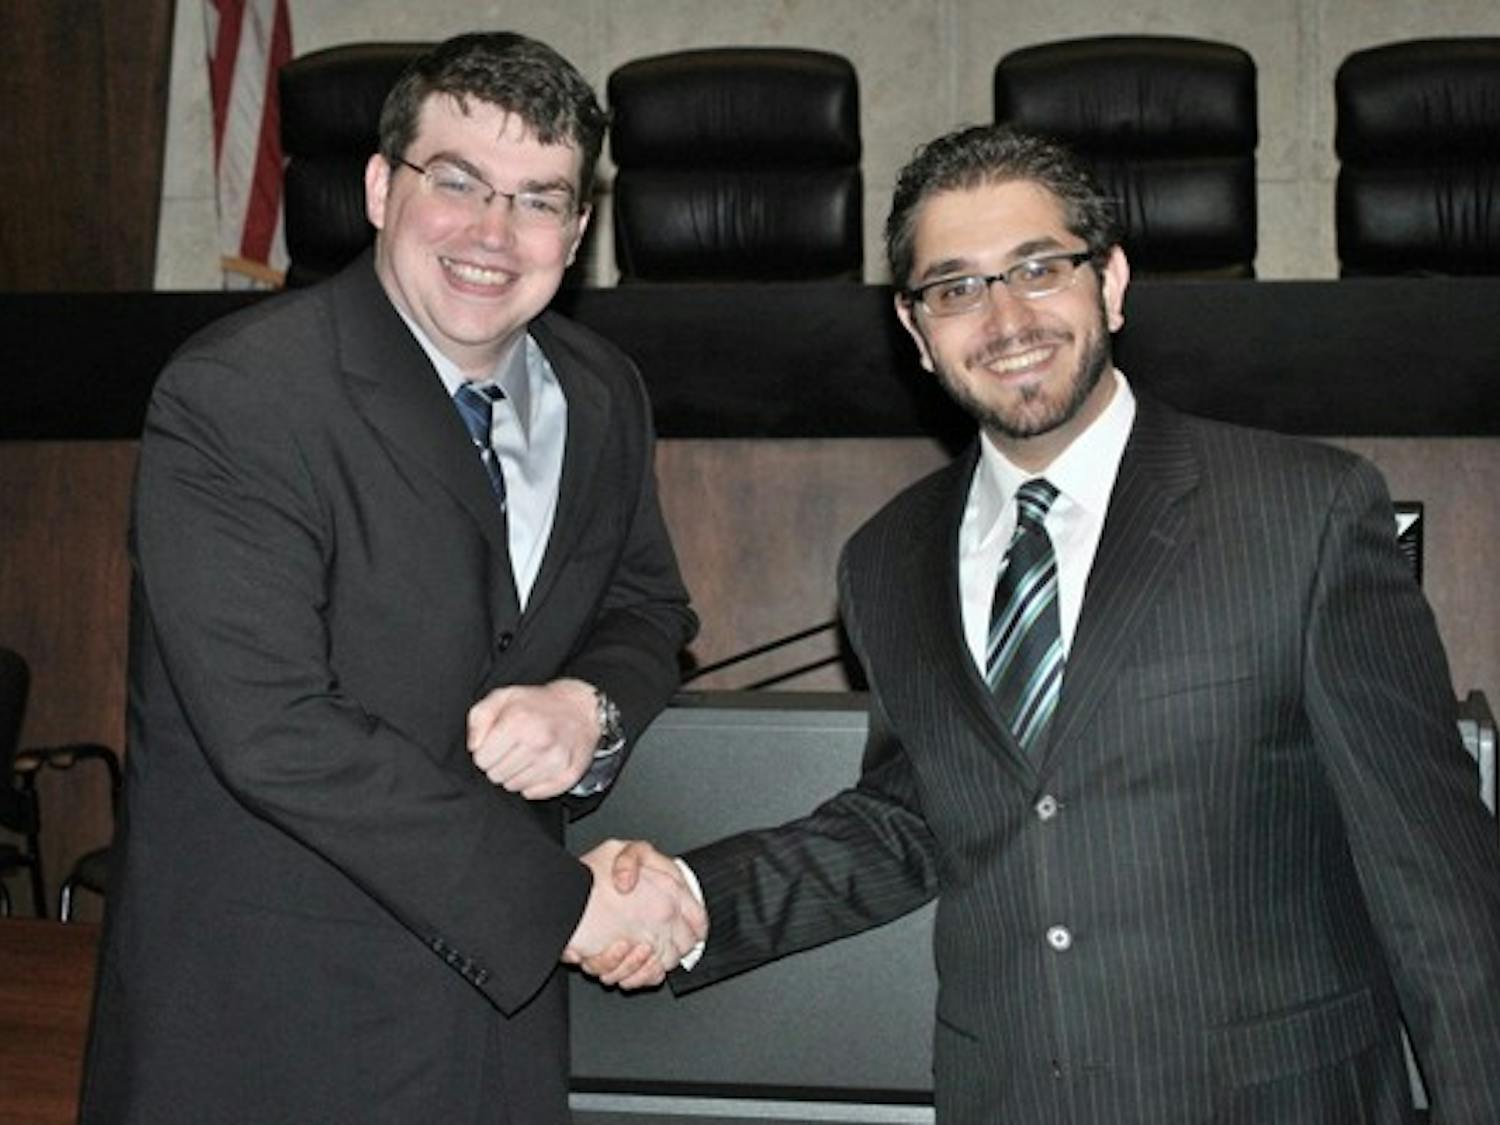 MAKING A POINT: First-year law students Daniel Hughes and Saman Golestan shake hands for a photo after winning both preliminary rounds of the Jenckes Closing Argument Competition Cup, in which participants prepare and deliver a closing argument for a closed case. (Photo Courtesy of Saman Golestan)